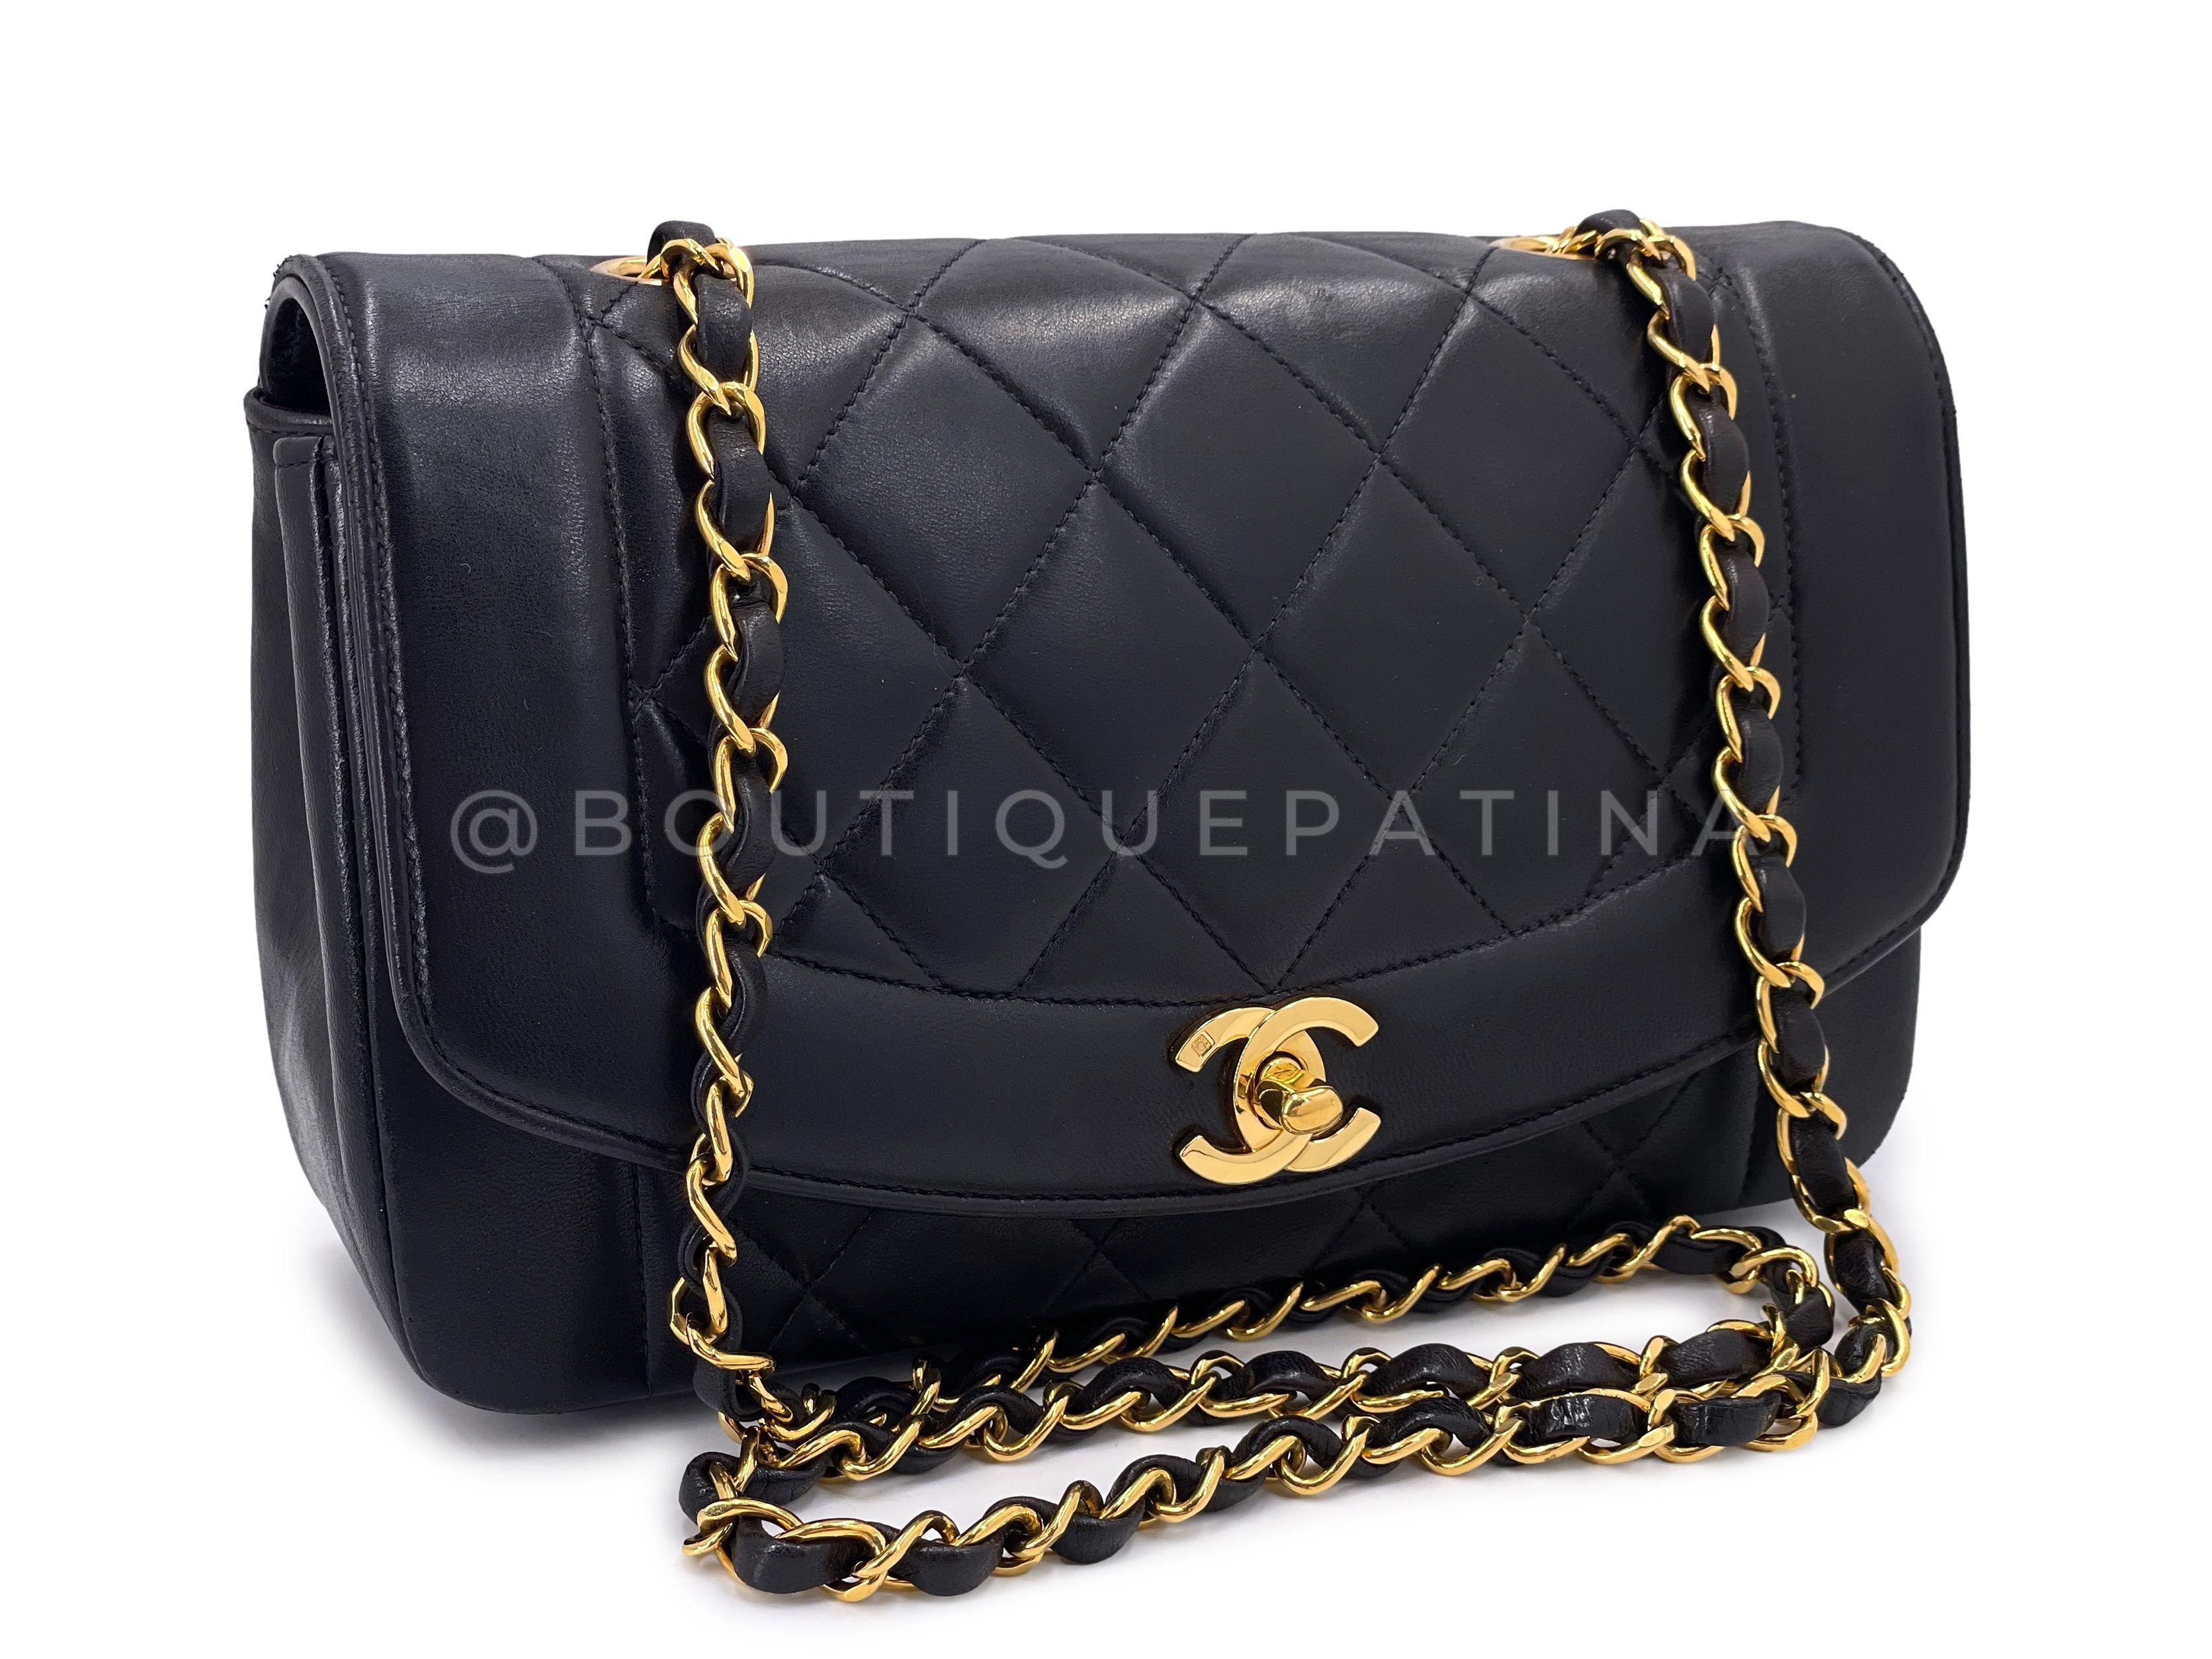 Store item: 65663
Vintage classic Chanel bags are known for their petal-soft lambskin, 24k gold plated hardware and sturdy craftsmanship.
This item is pre-owned and vintage, and a fabulous collectible piece. This style with single chain strap and